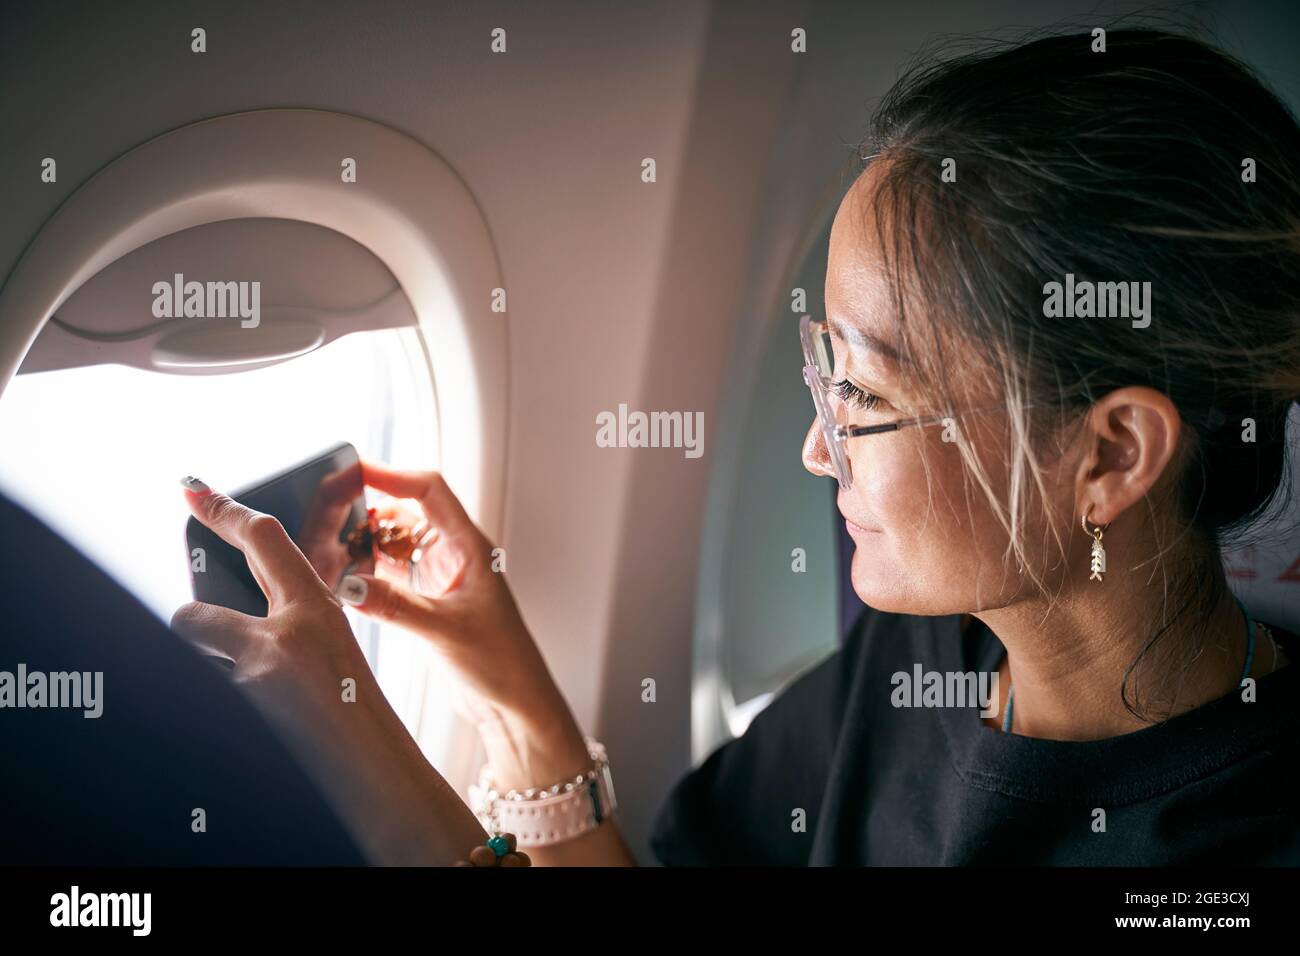 asian woman passenger taking a picture using mobile phone in airplane cabin Stock Photo